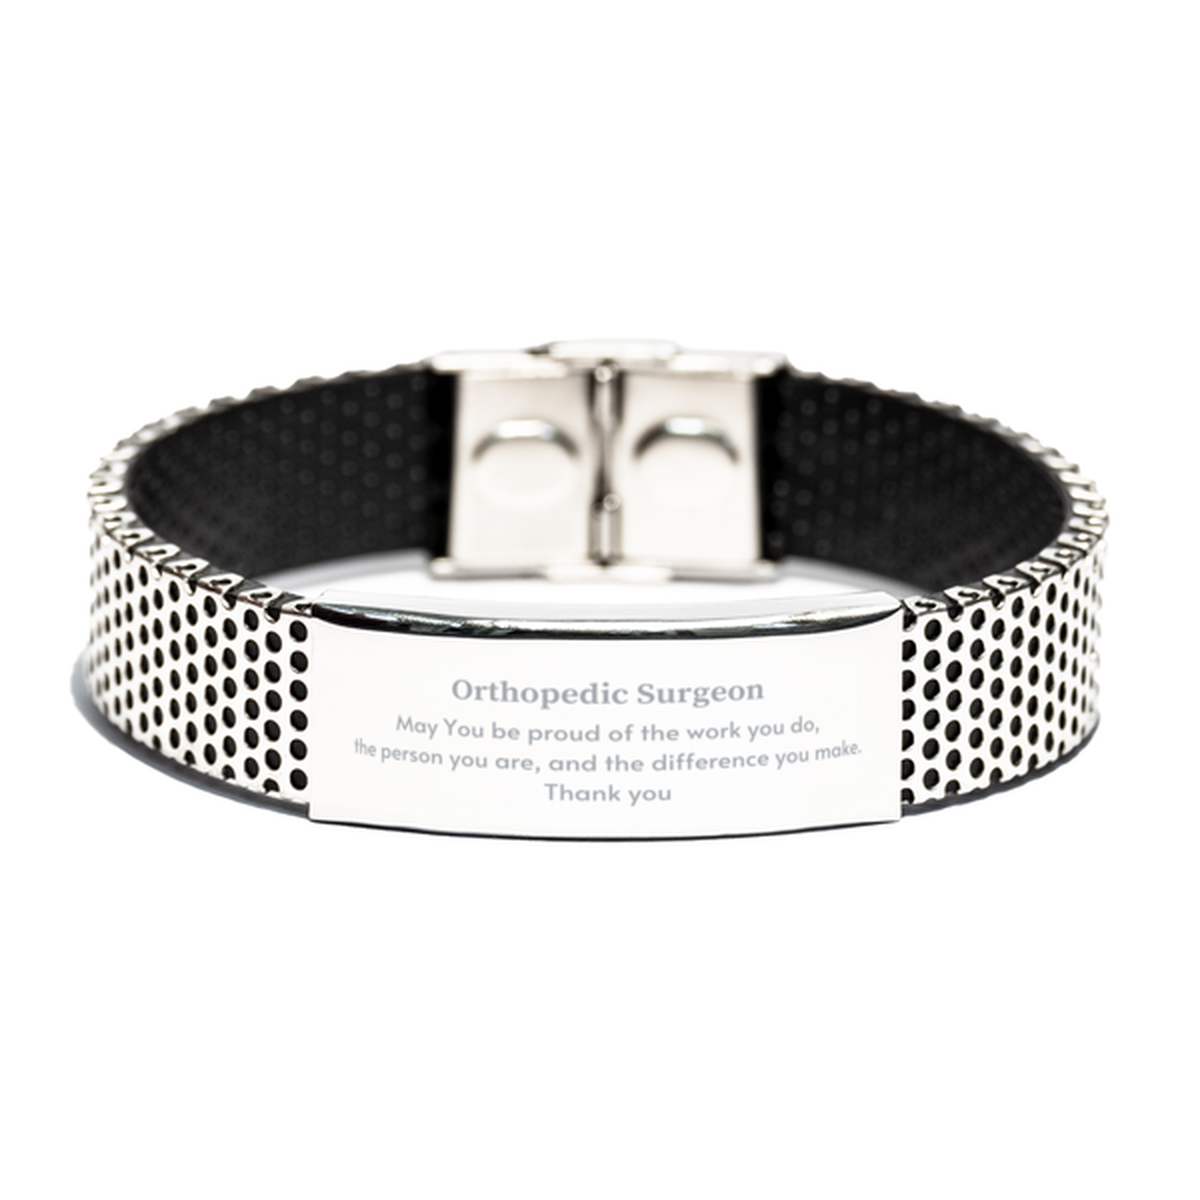 Heartwarming Stainless Steel Bracelet Retirement Coworkers Gifts for Orthopedic Surgeon, Orthopedic Surgeon May You be proud of the work you do, the person you are Gifts for Boss Men Women Friends